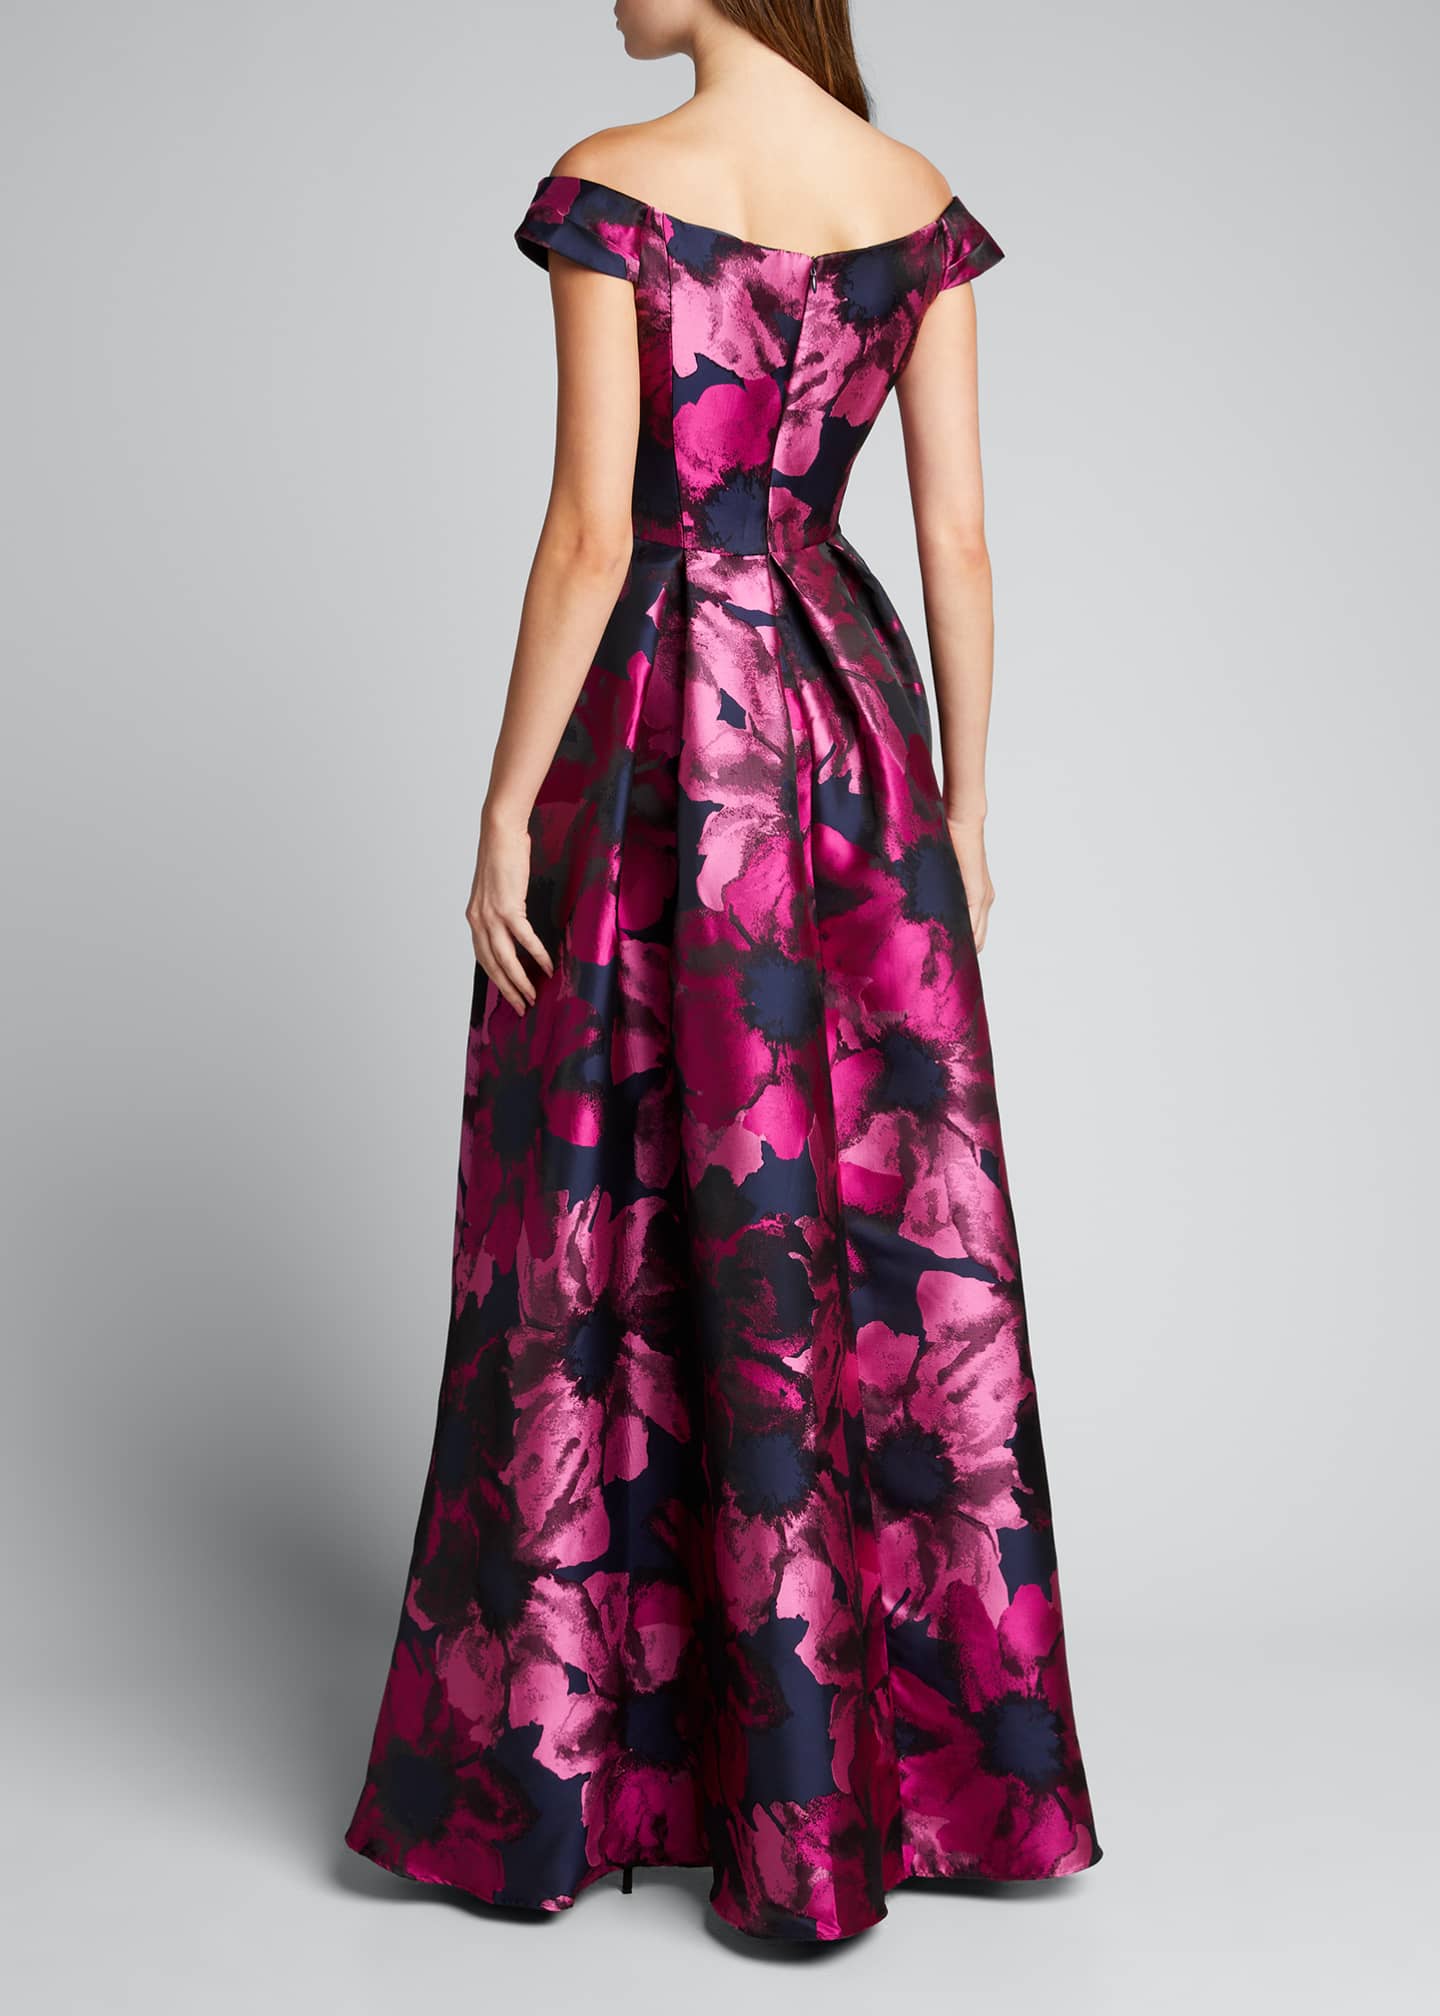 Carmen Marc Valvo Infusion Sweetheart Off-the-Shoulder Floral Jacquard ...